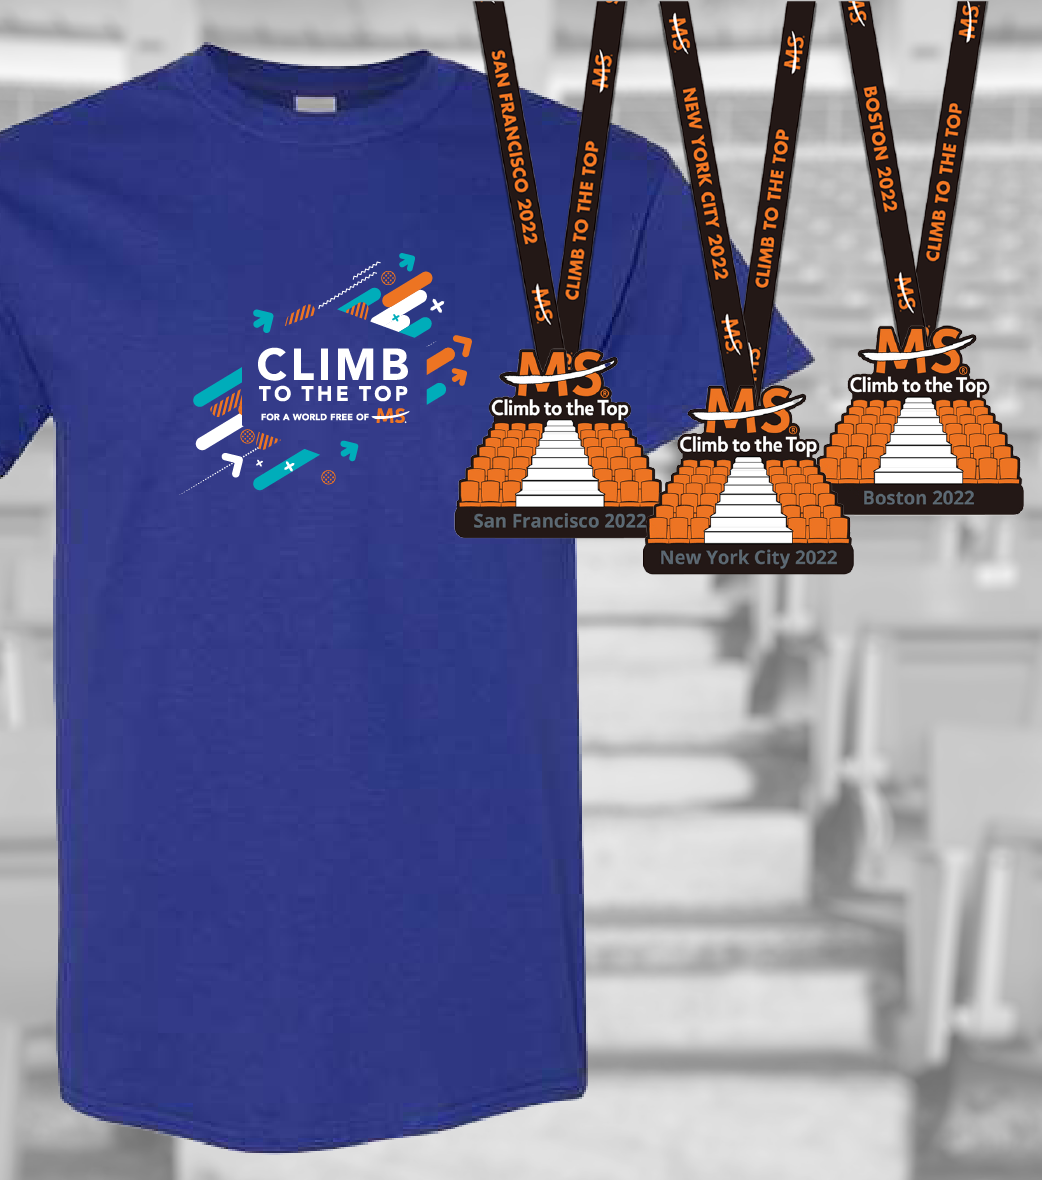 T-shirt and medal